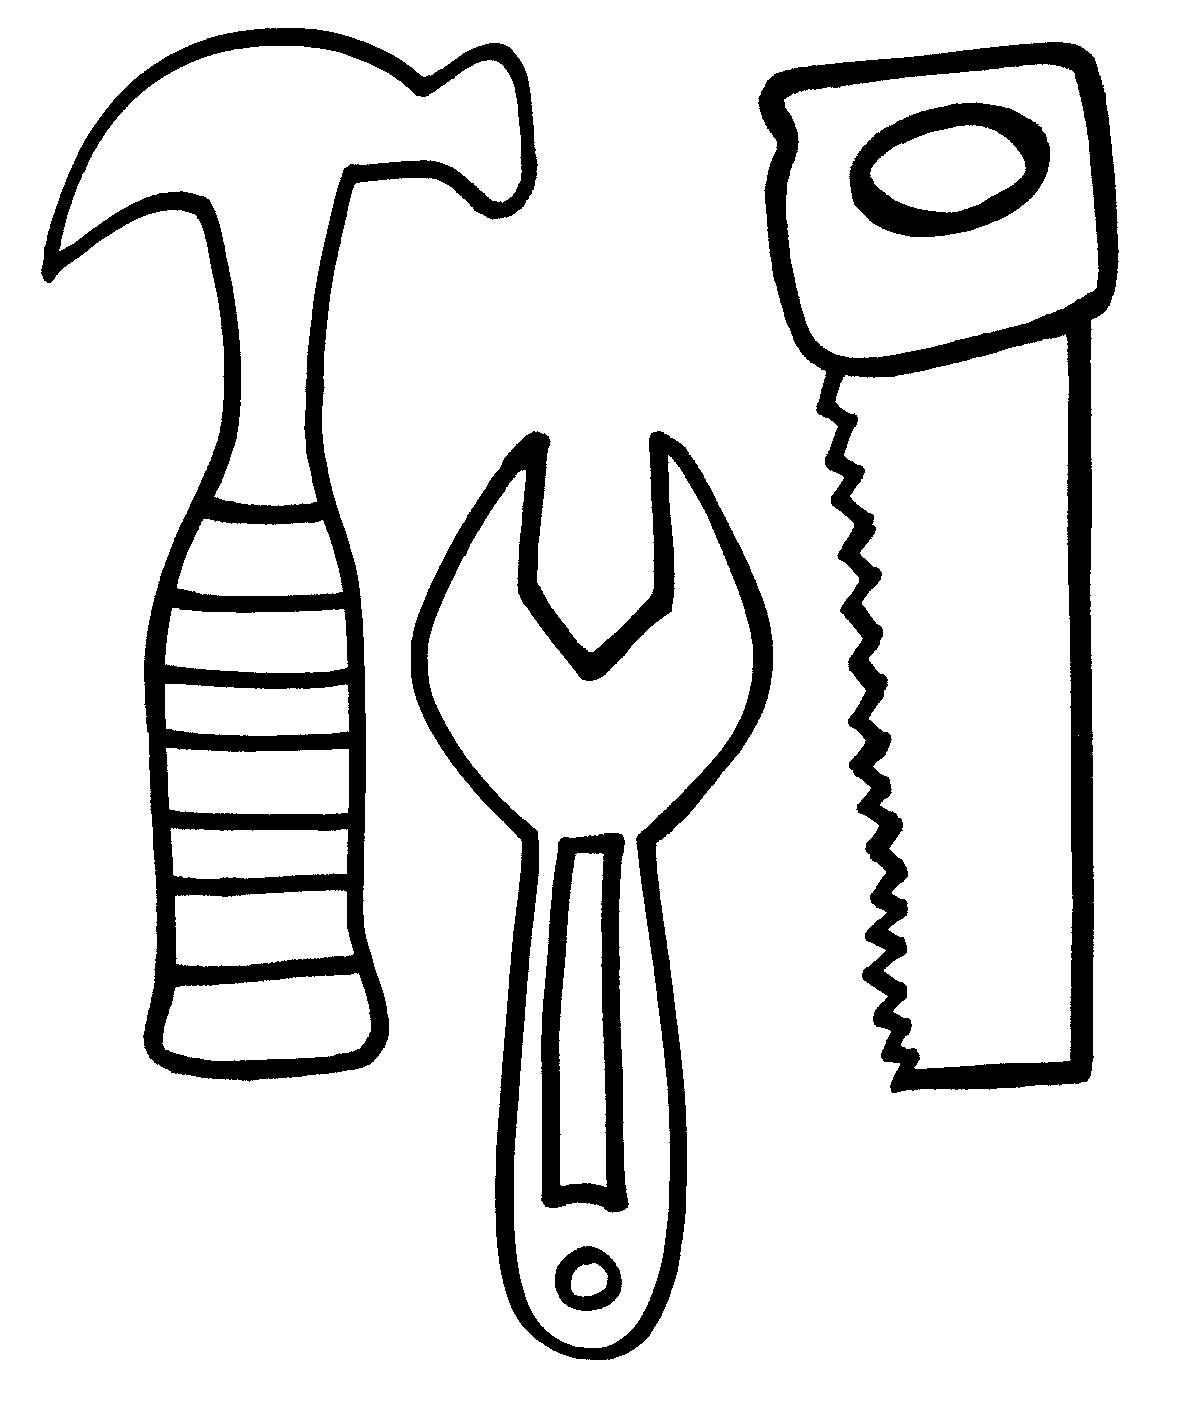 Tool coloring pages to download and print for free